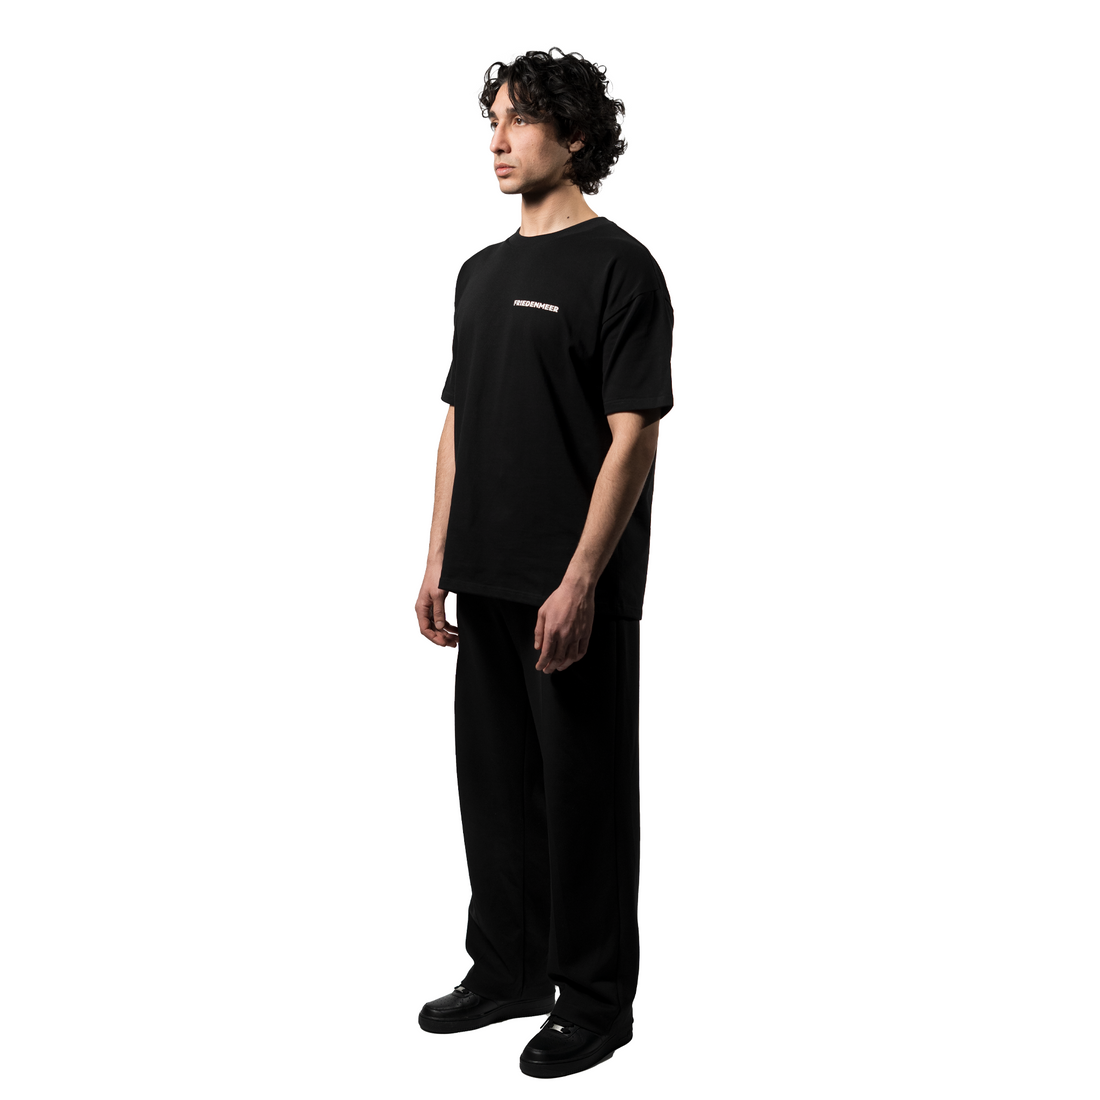 A model showcases an elegant oversized black T-shirt with the white brand name FRIEDENMEER across the chest, paired with matching black trousers and shoes, highlighting the brand's sleek elegance luxury.